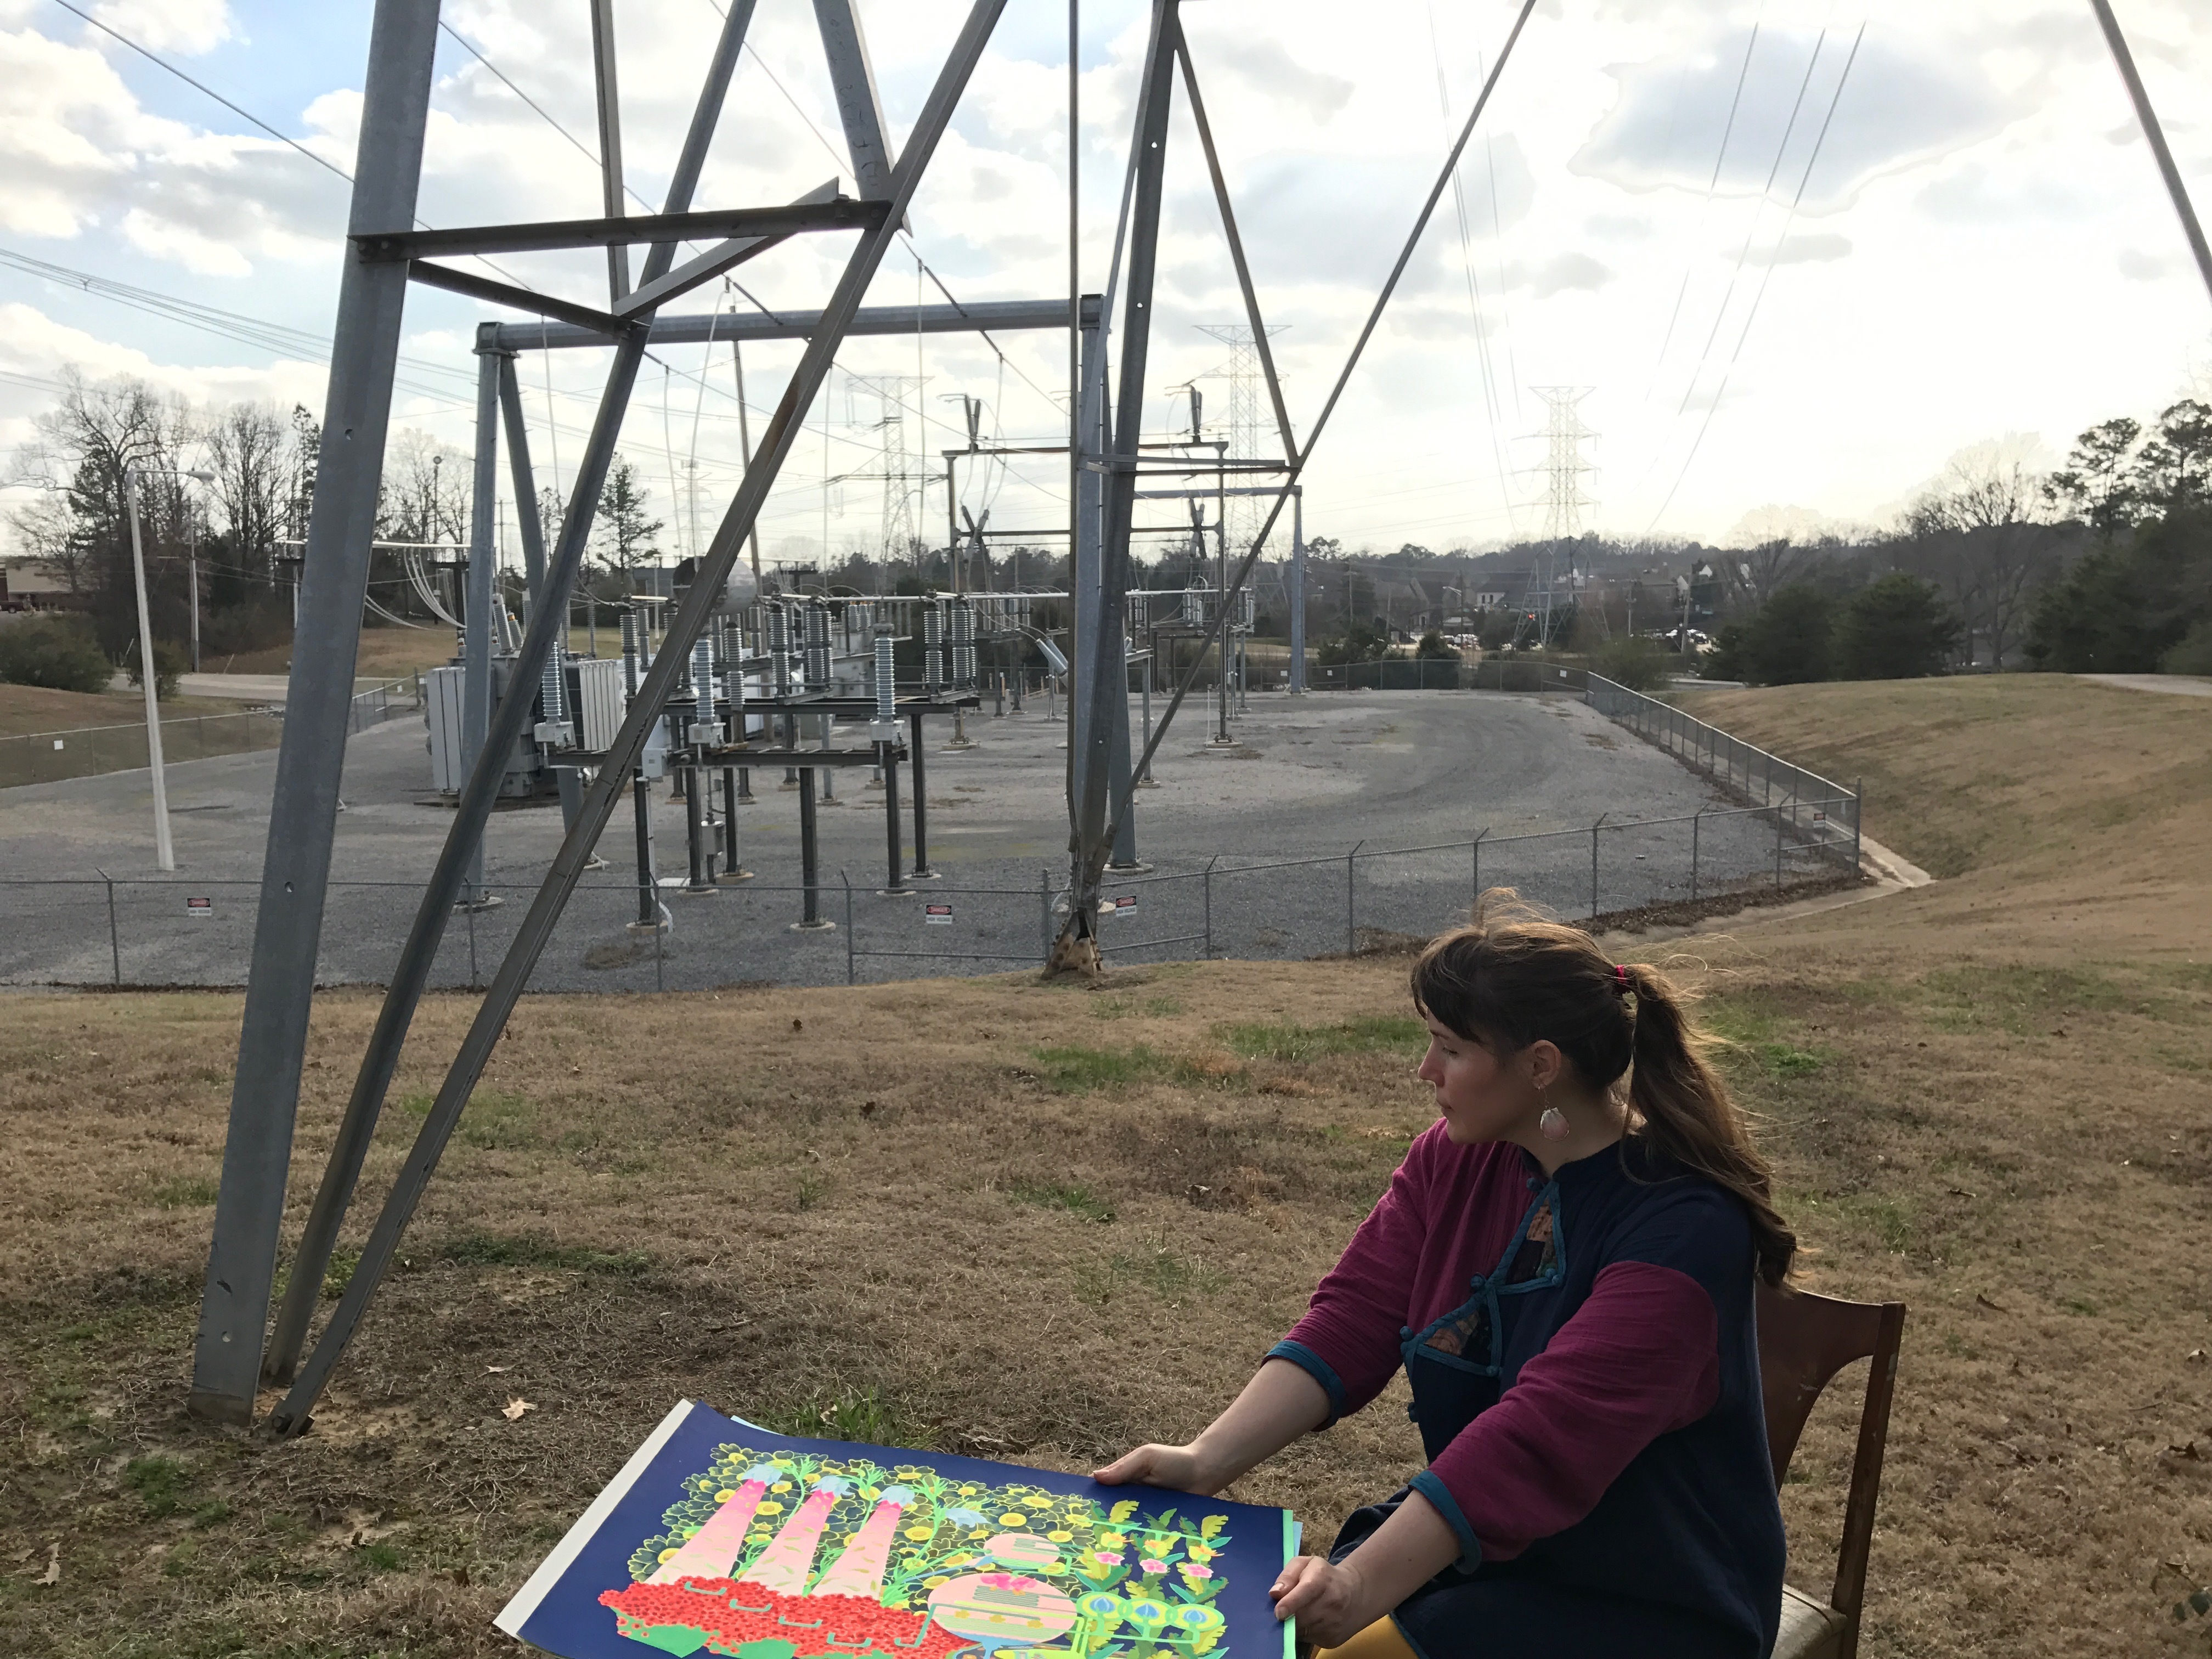 Emily Thomas, Studio Visit, February 2017 (on location beside an electric power station in Memphis, TN / many works pictured are in-progress)